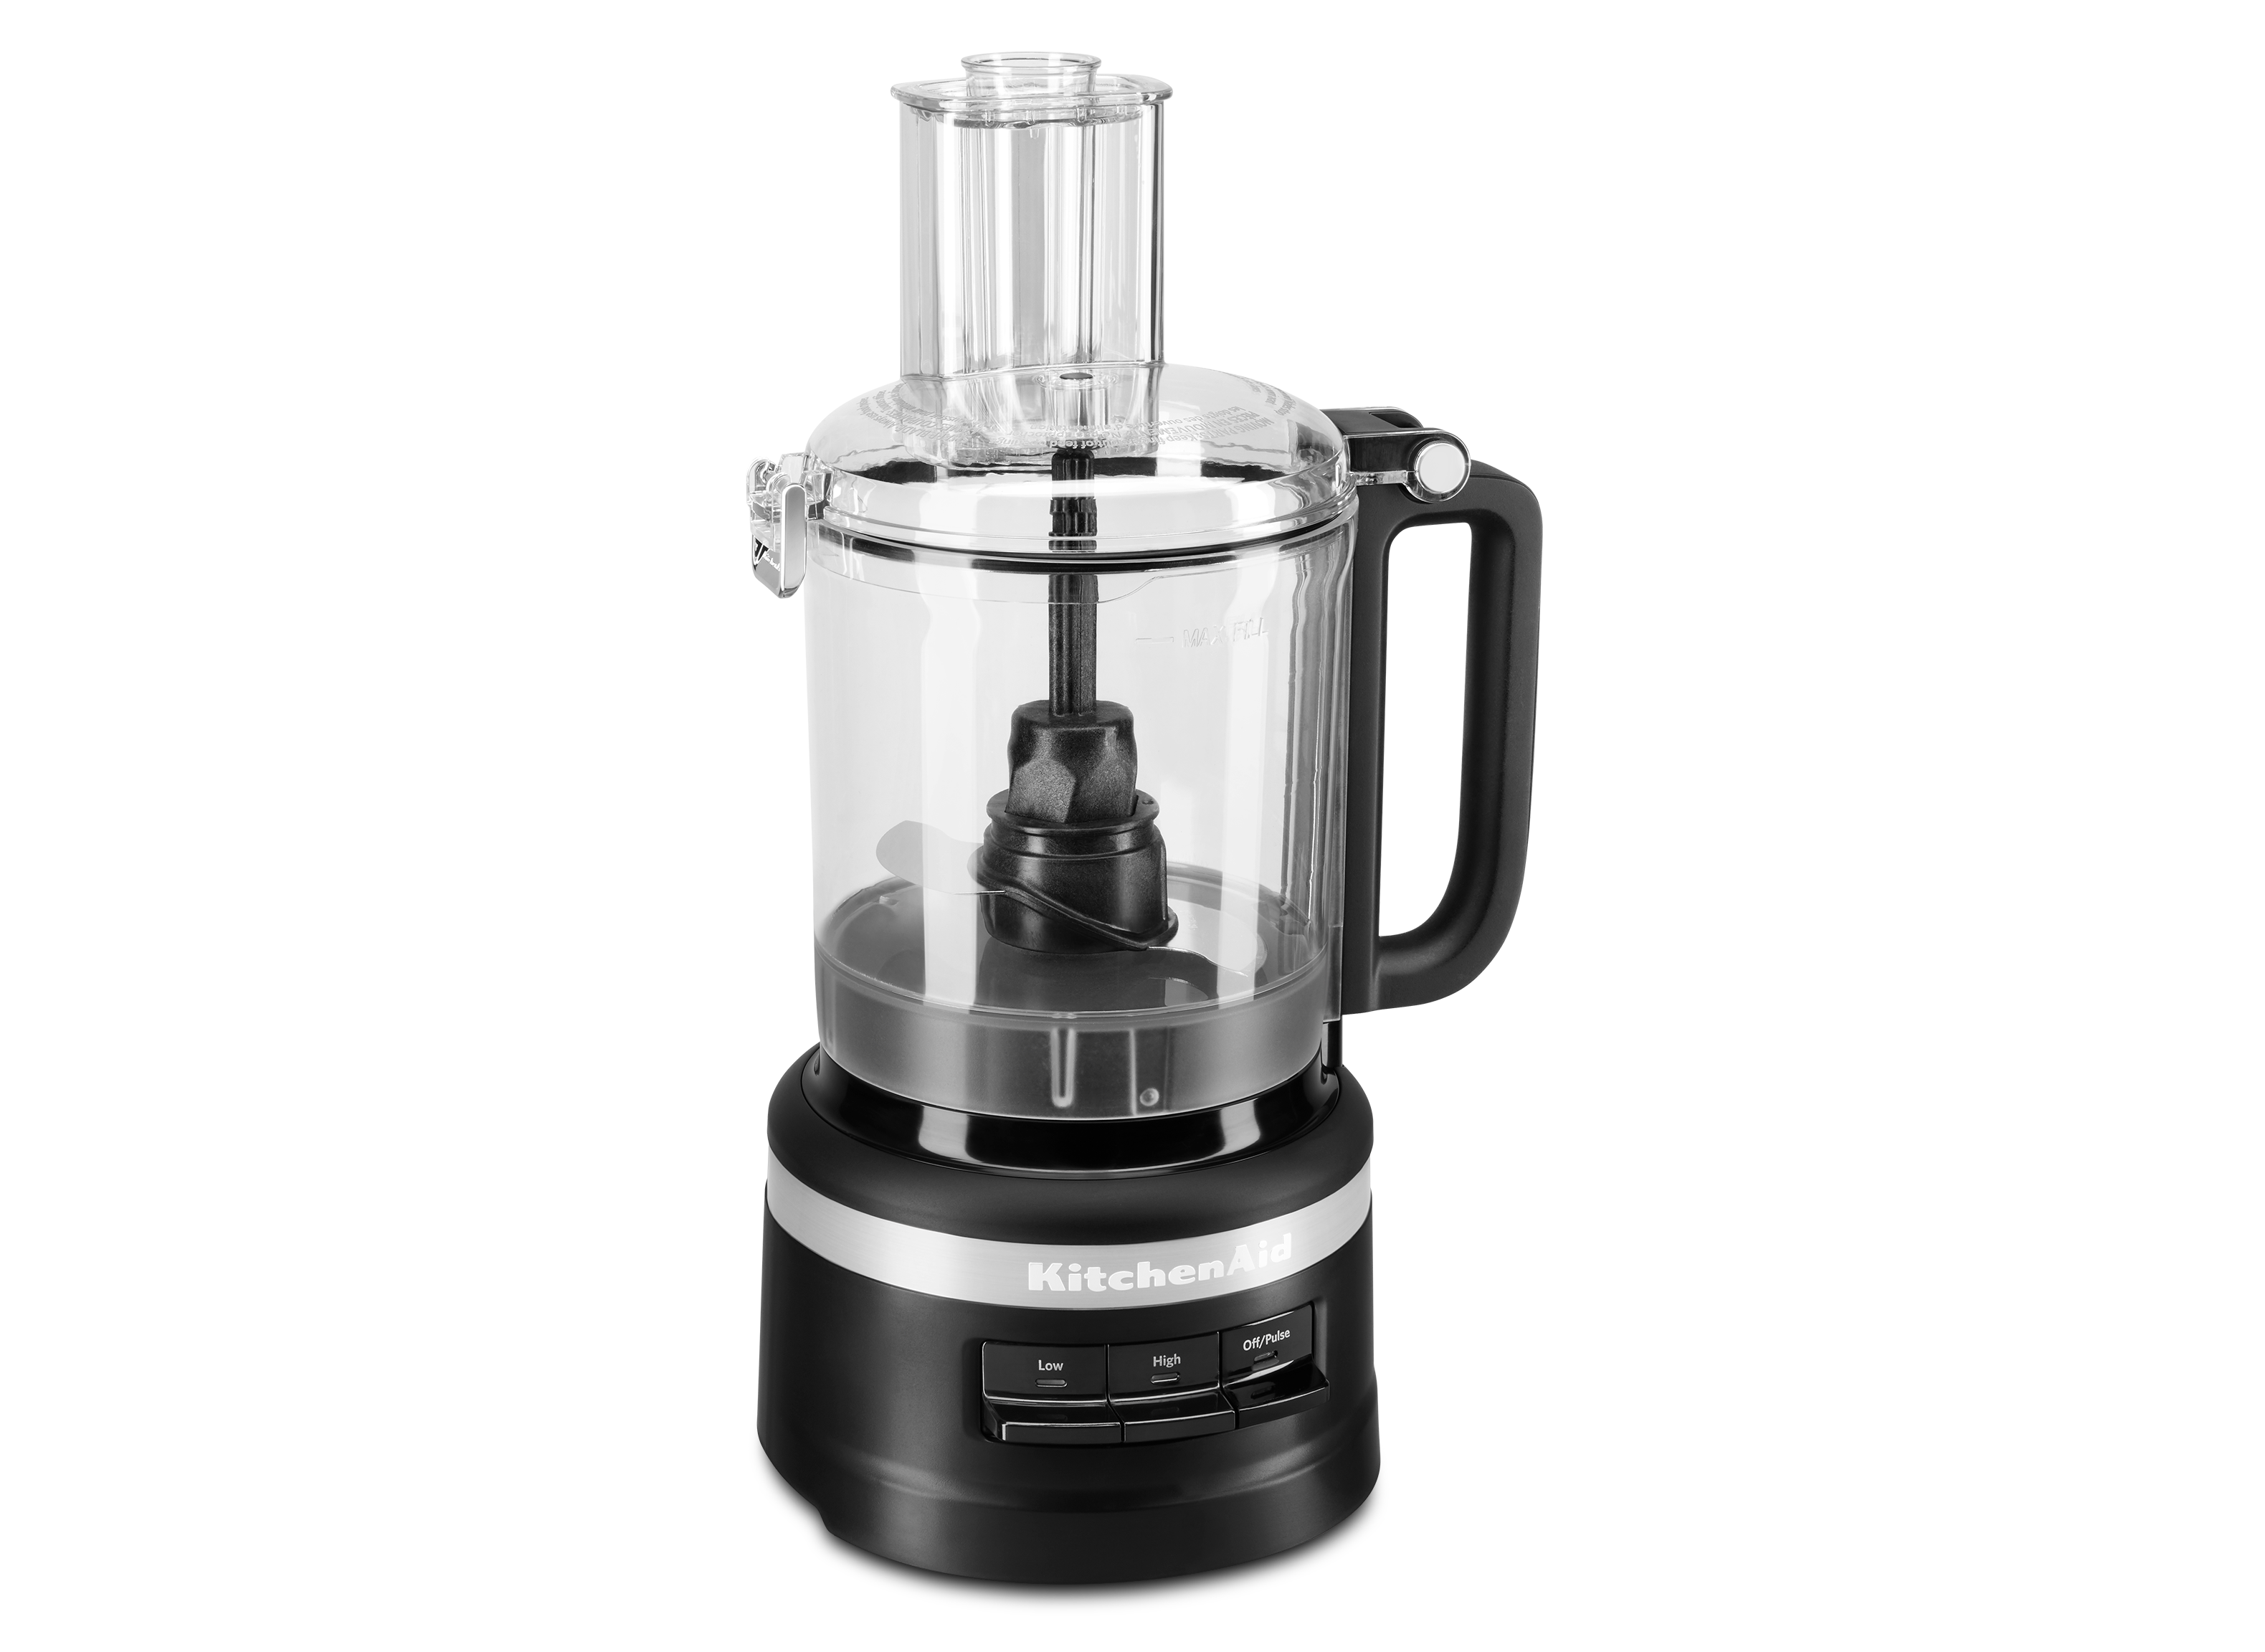 https://crdms.images.consumerreports.org/prod/products/cr/models/401569-food-processors-kitchenaid-kfp0919bm-plus-10014108.png